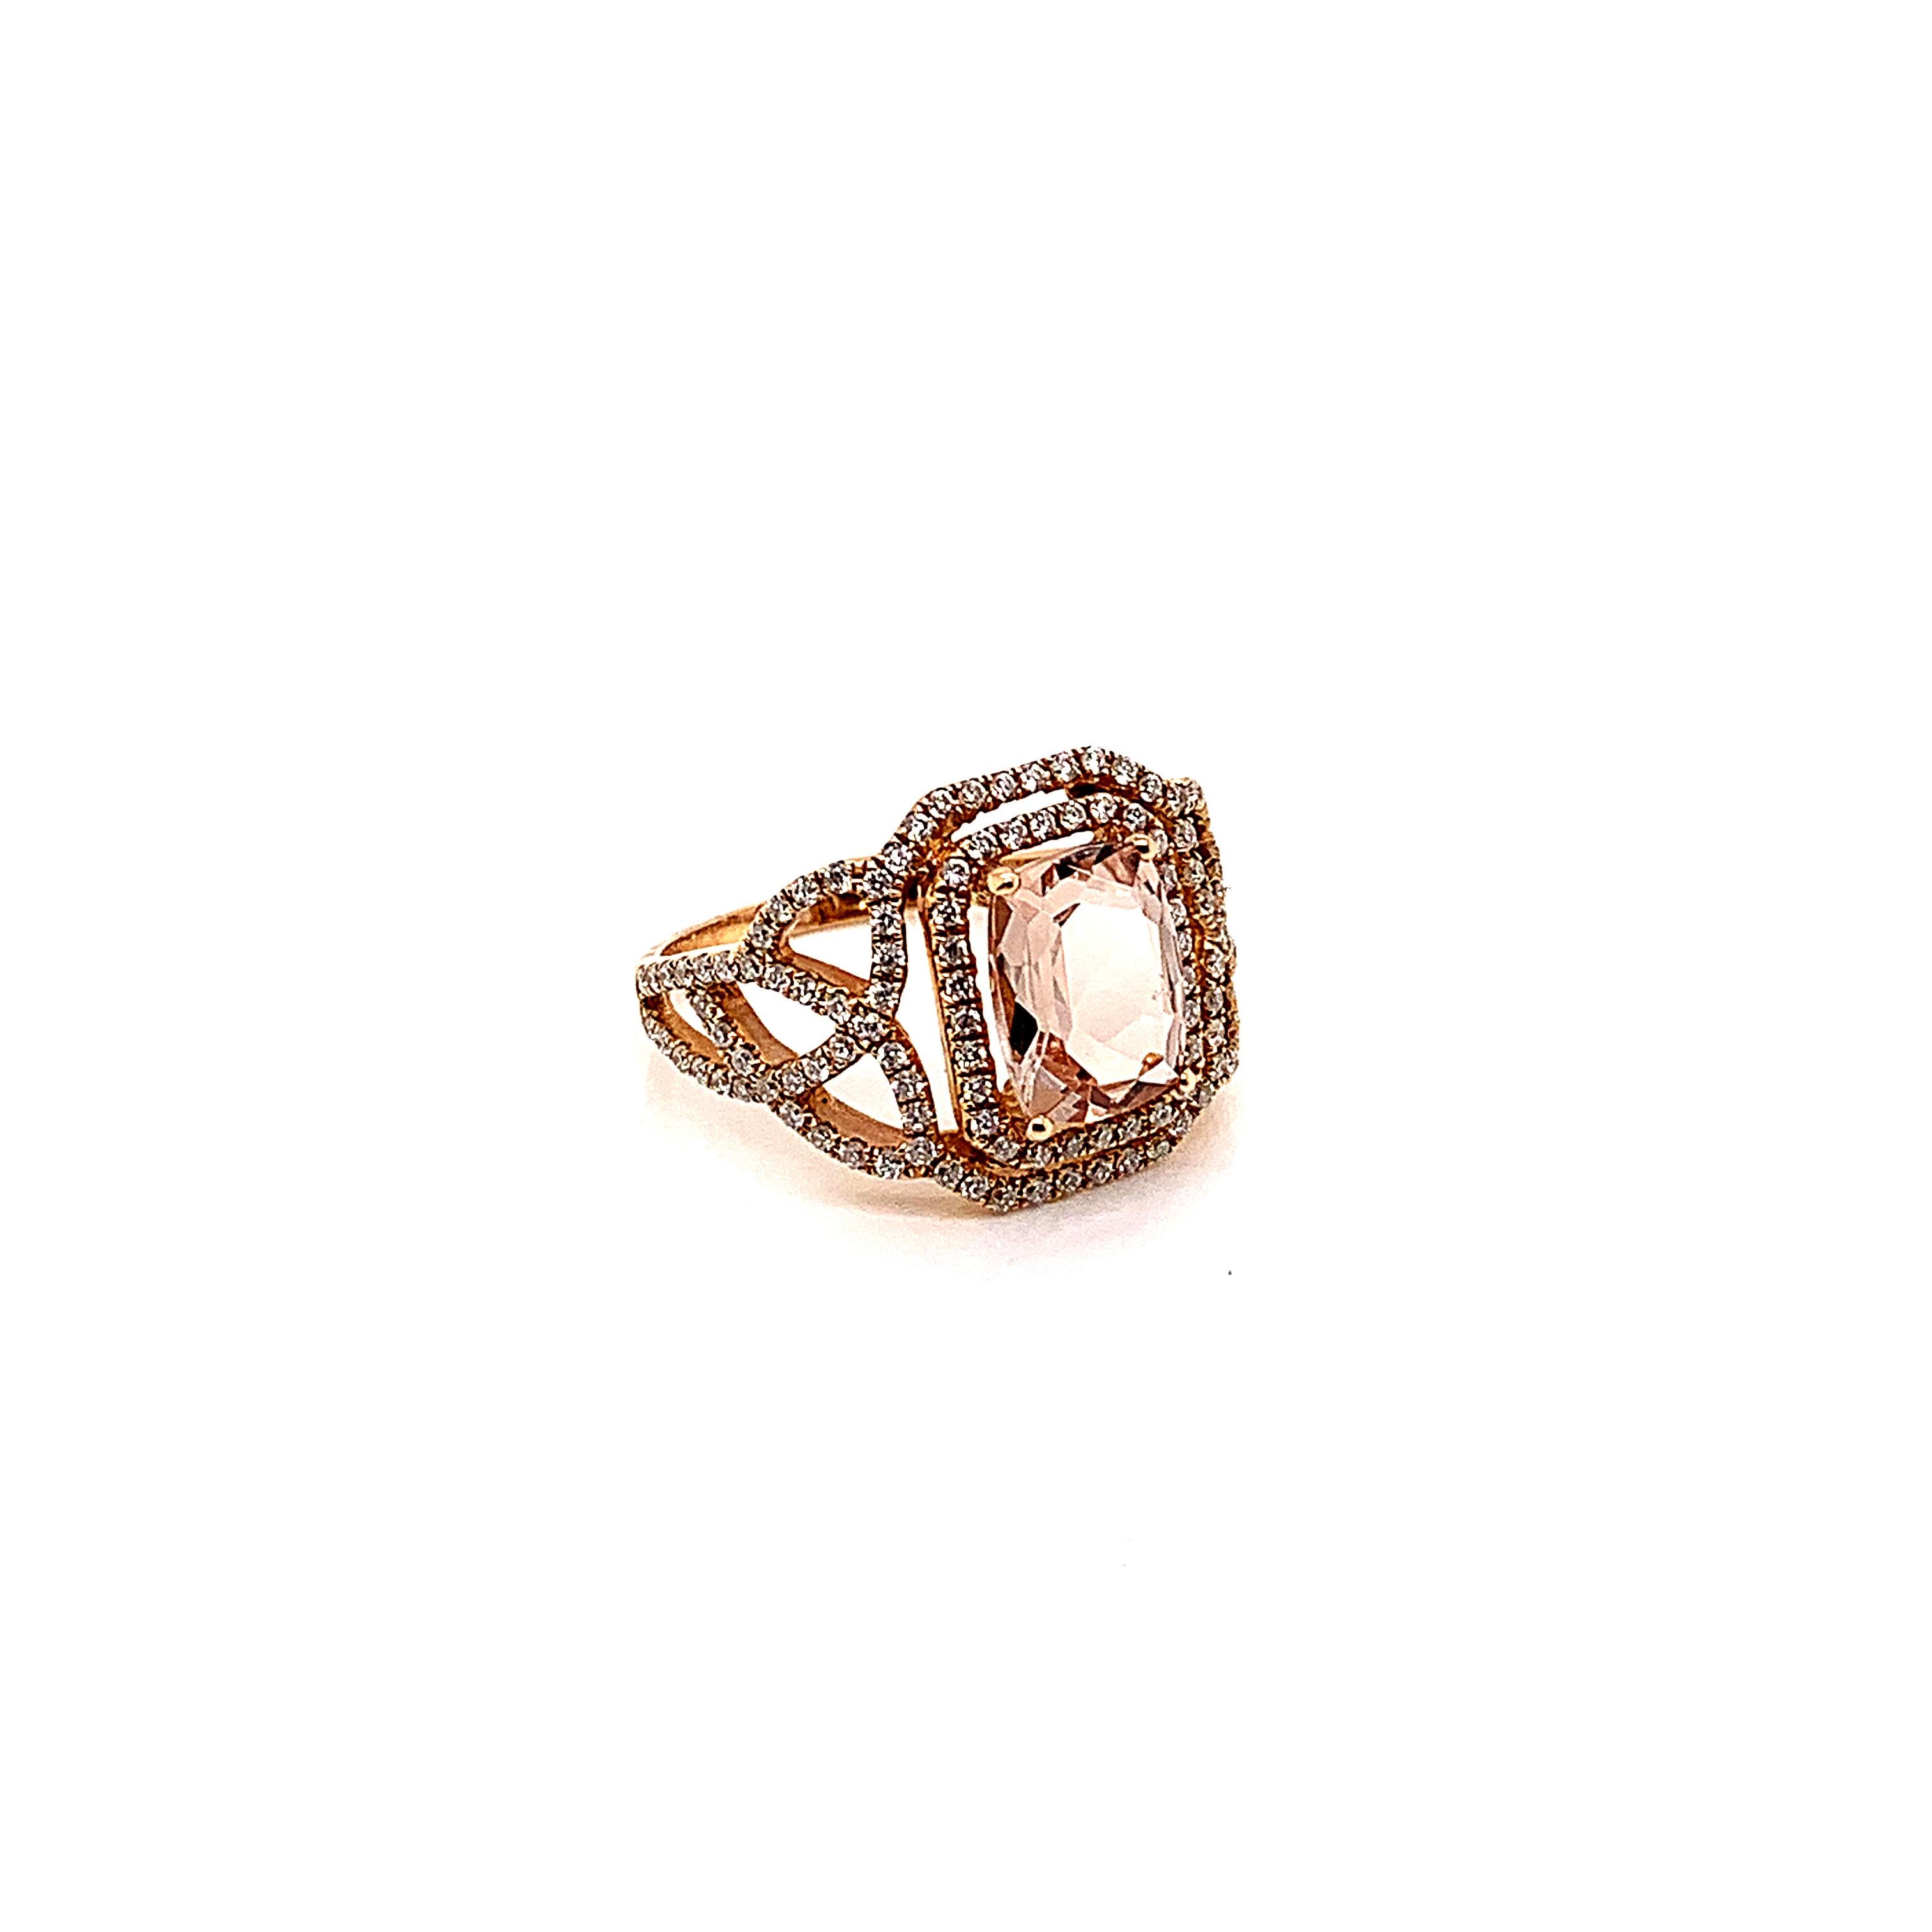 This collection features an array of magnificent morganites! Accented with diamonds these rings are made in rose gold and so give a classic yet elegant look. 

Classic morganite ring in 18K rose gold with diamonds. 

Morganite: 1.99 carat cushion